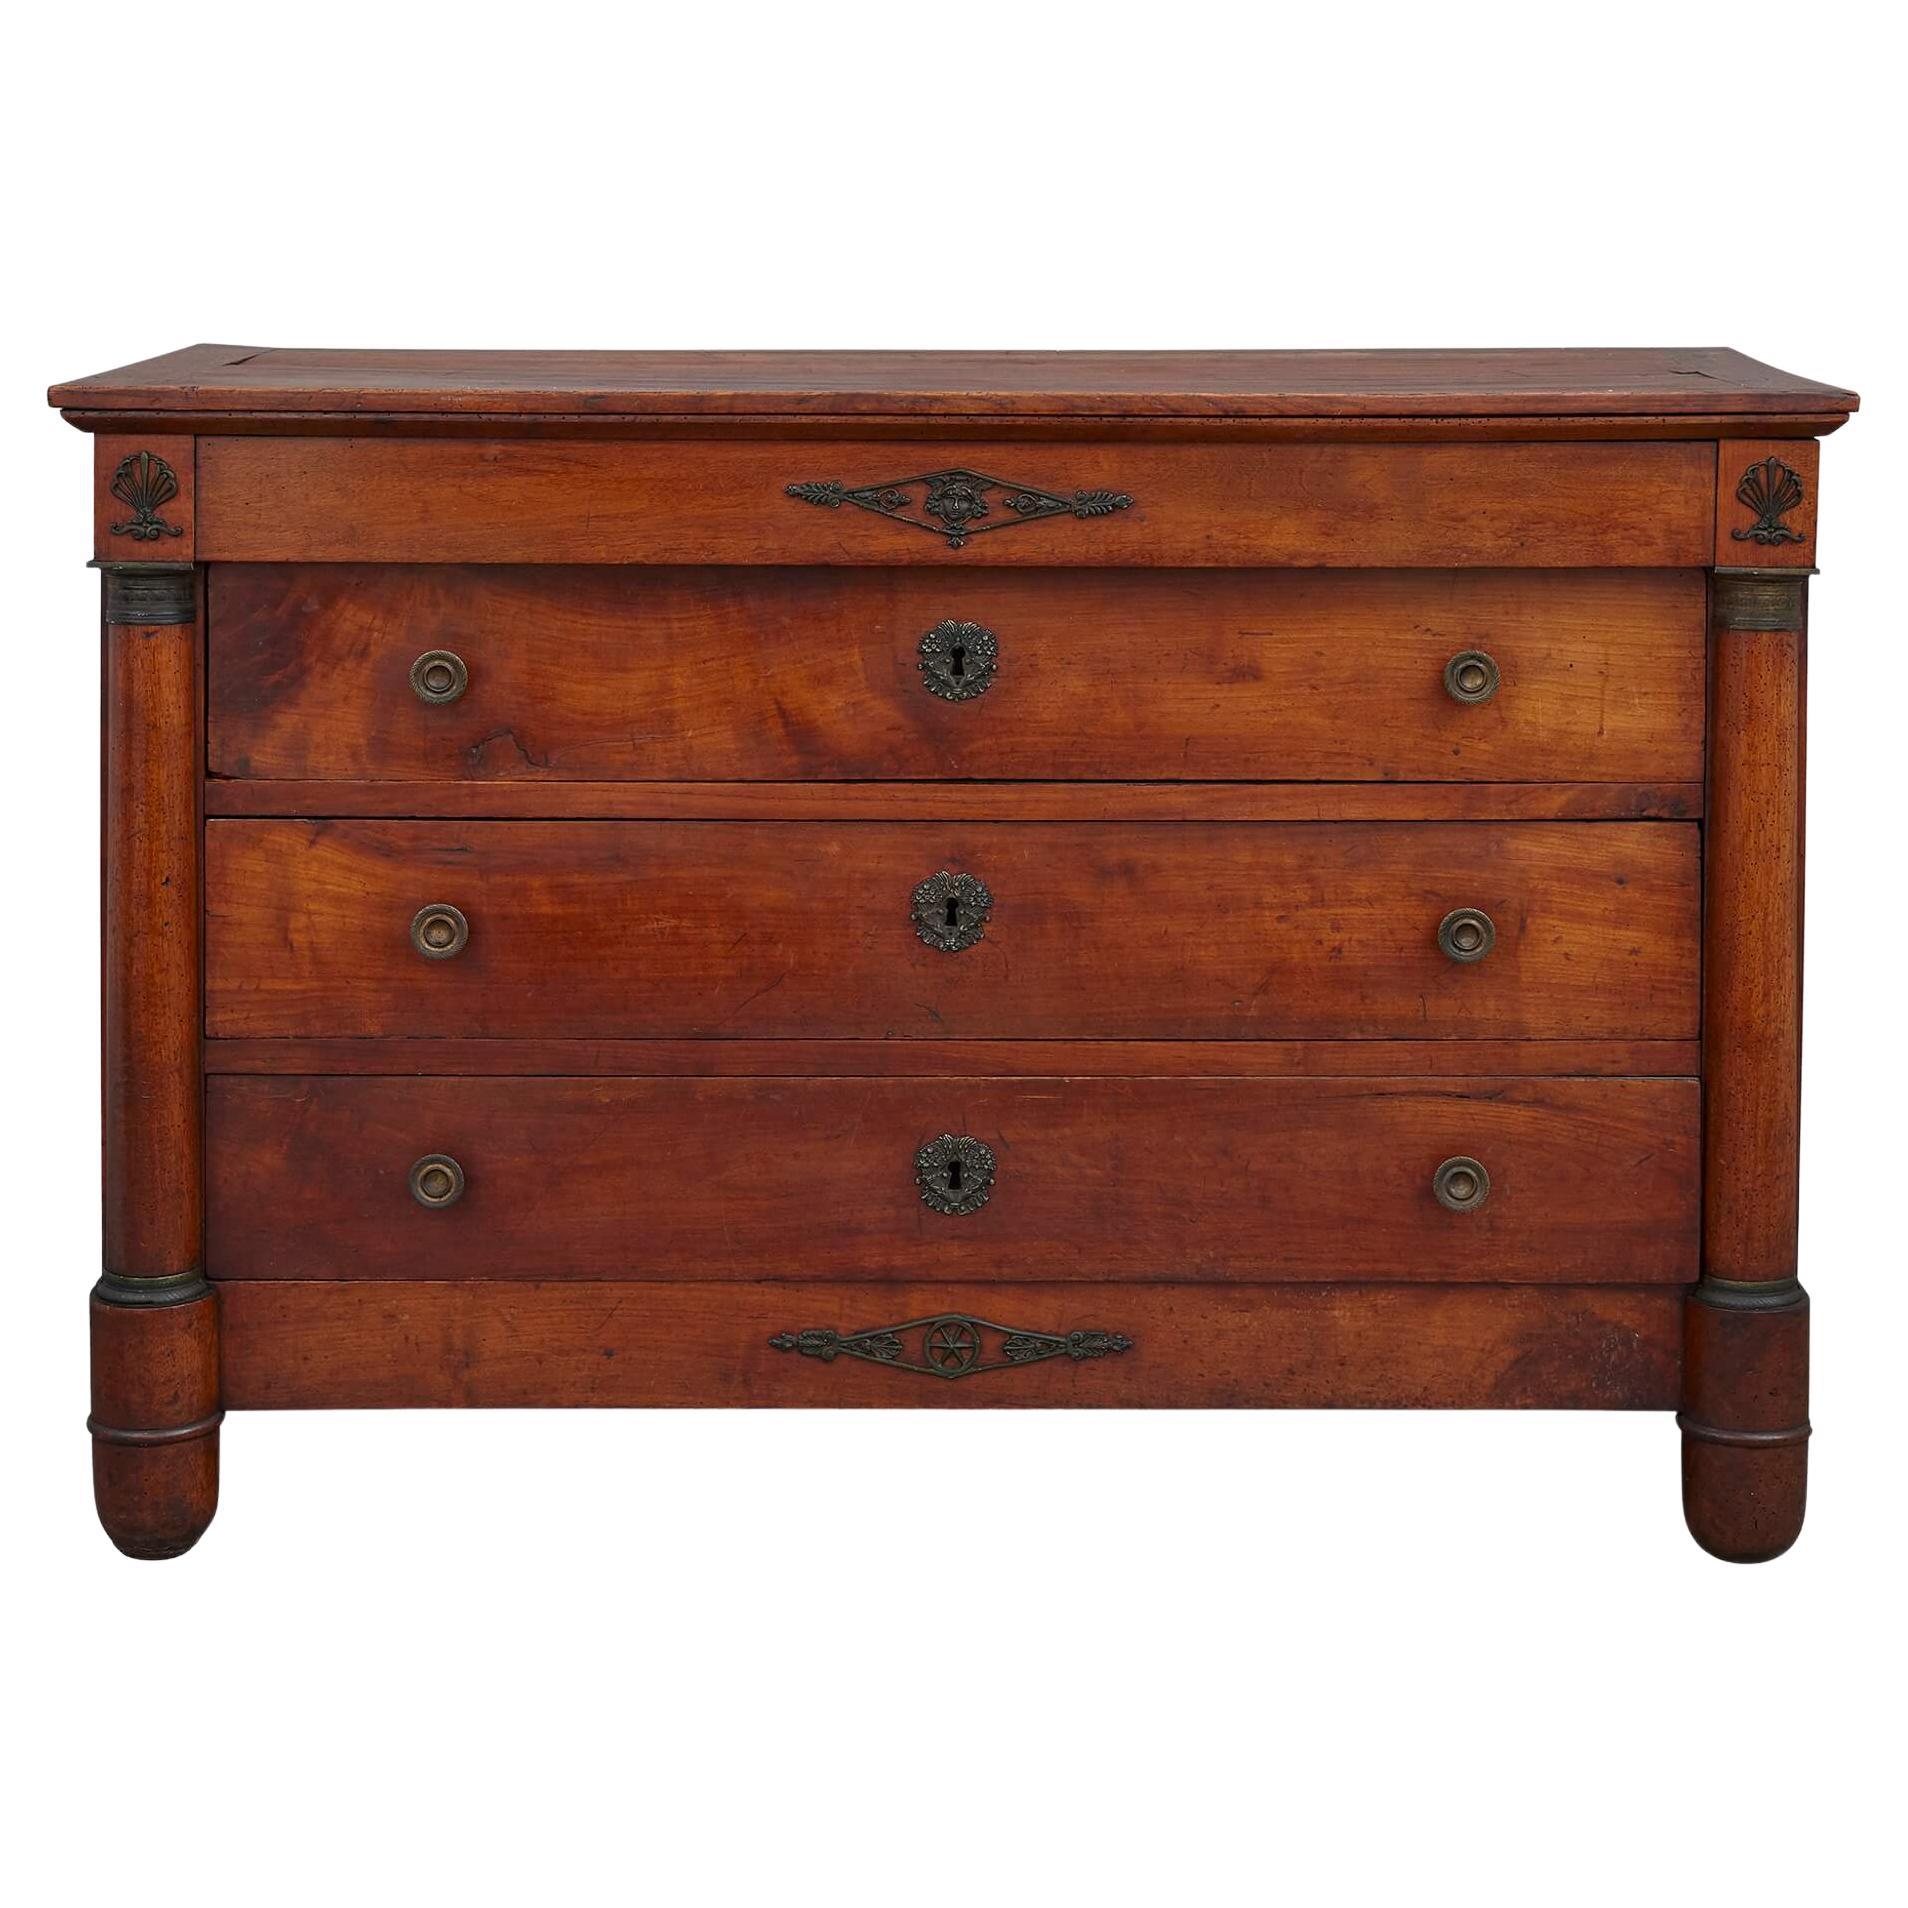 Antique French Empire Style Chest of Drawers